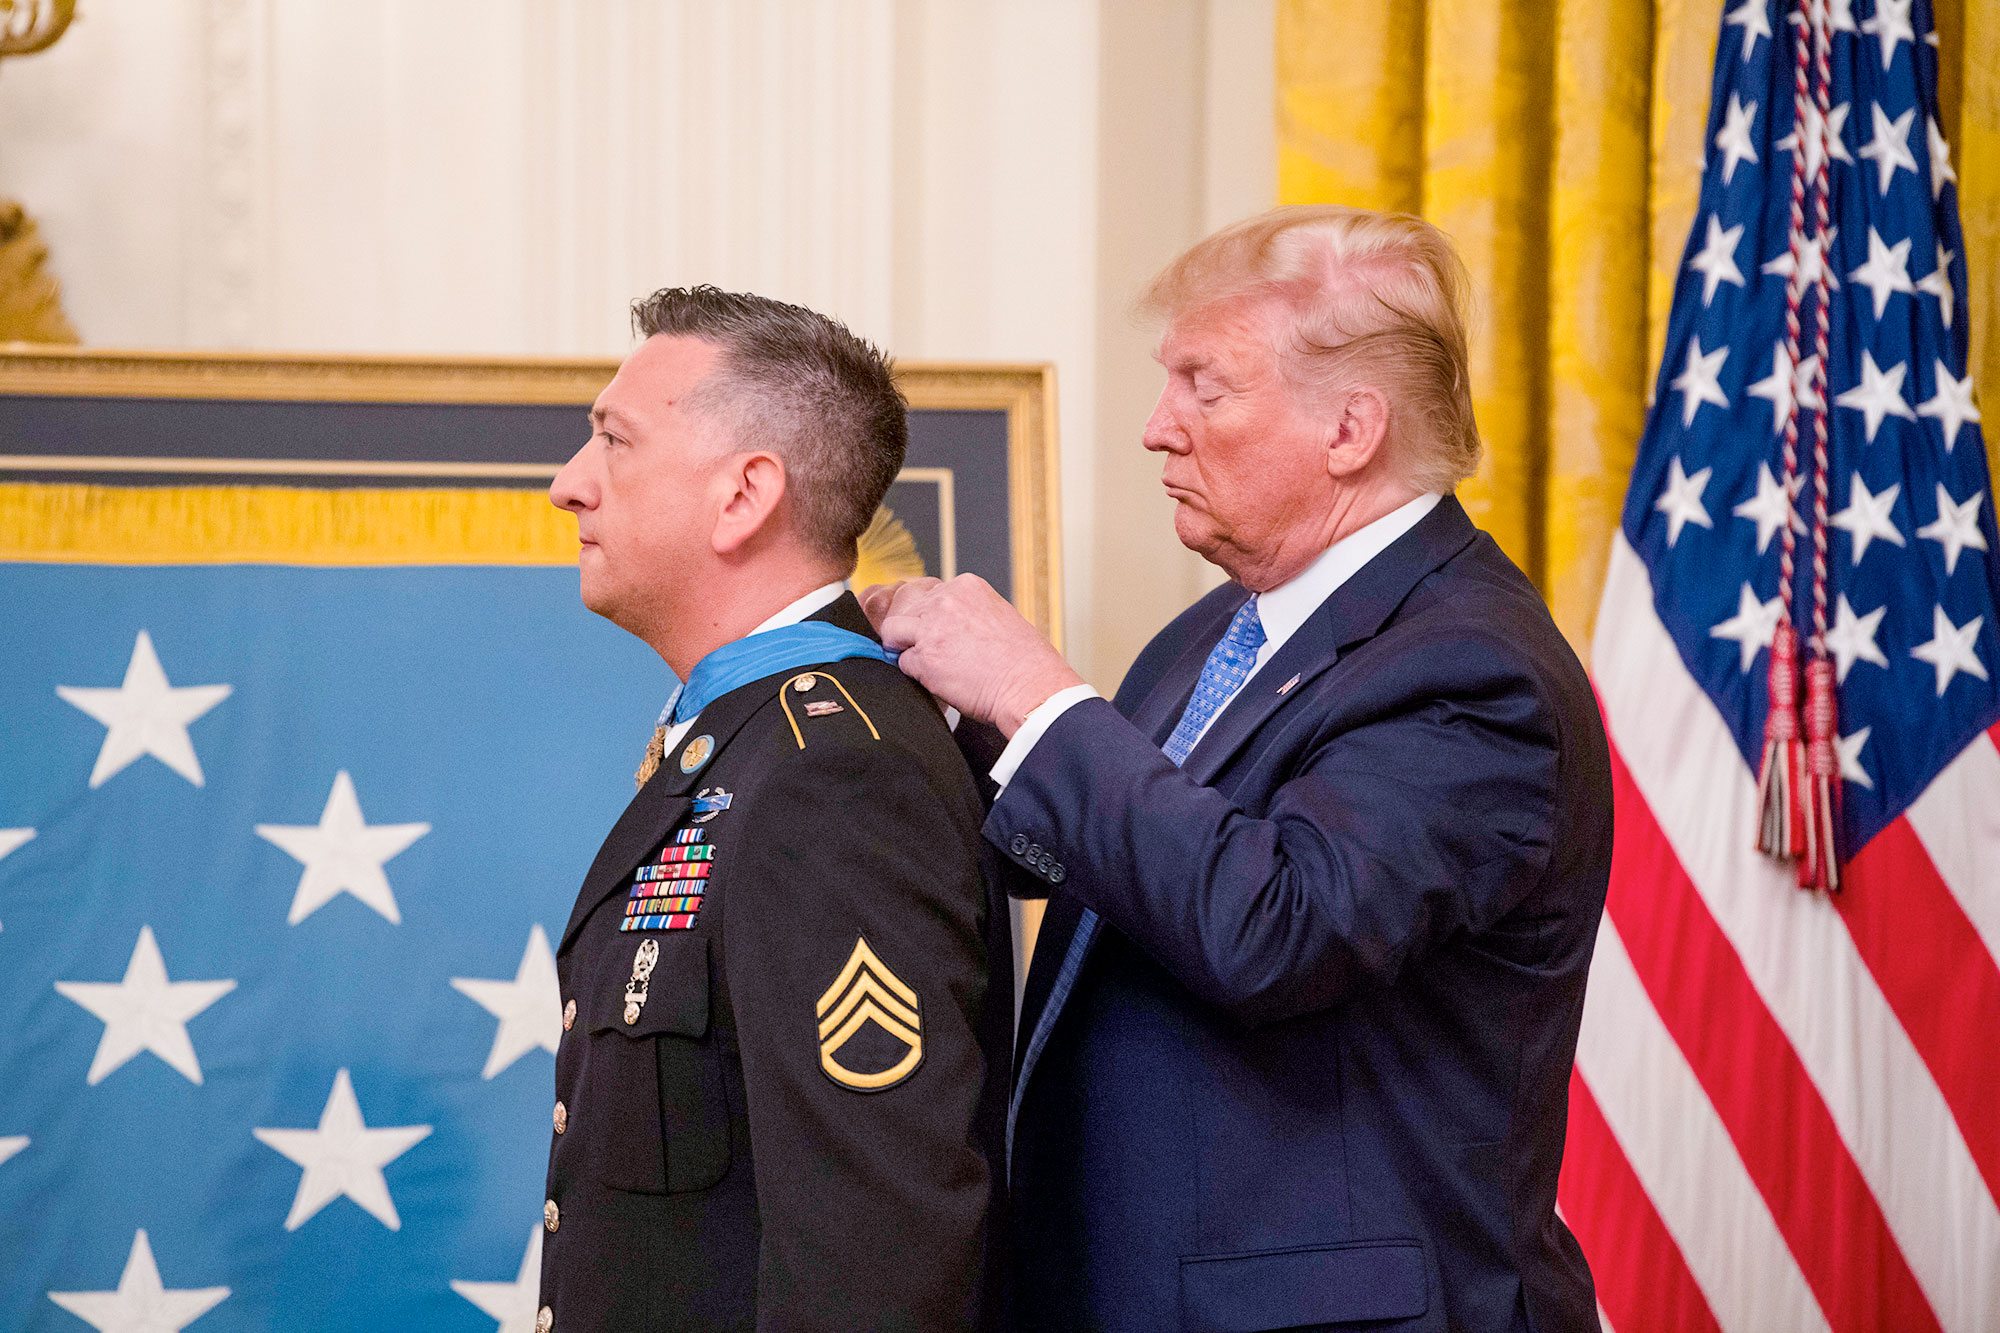 President Donald J. Trump presents the Medal of Honor to former Army Staff Sgt. David G. Bellavia during a ceremony at the White House in Washington, D.C., June 25, 2019.